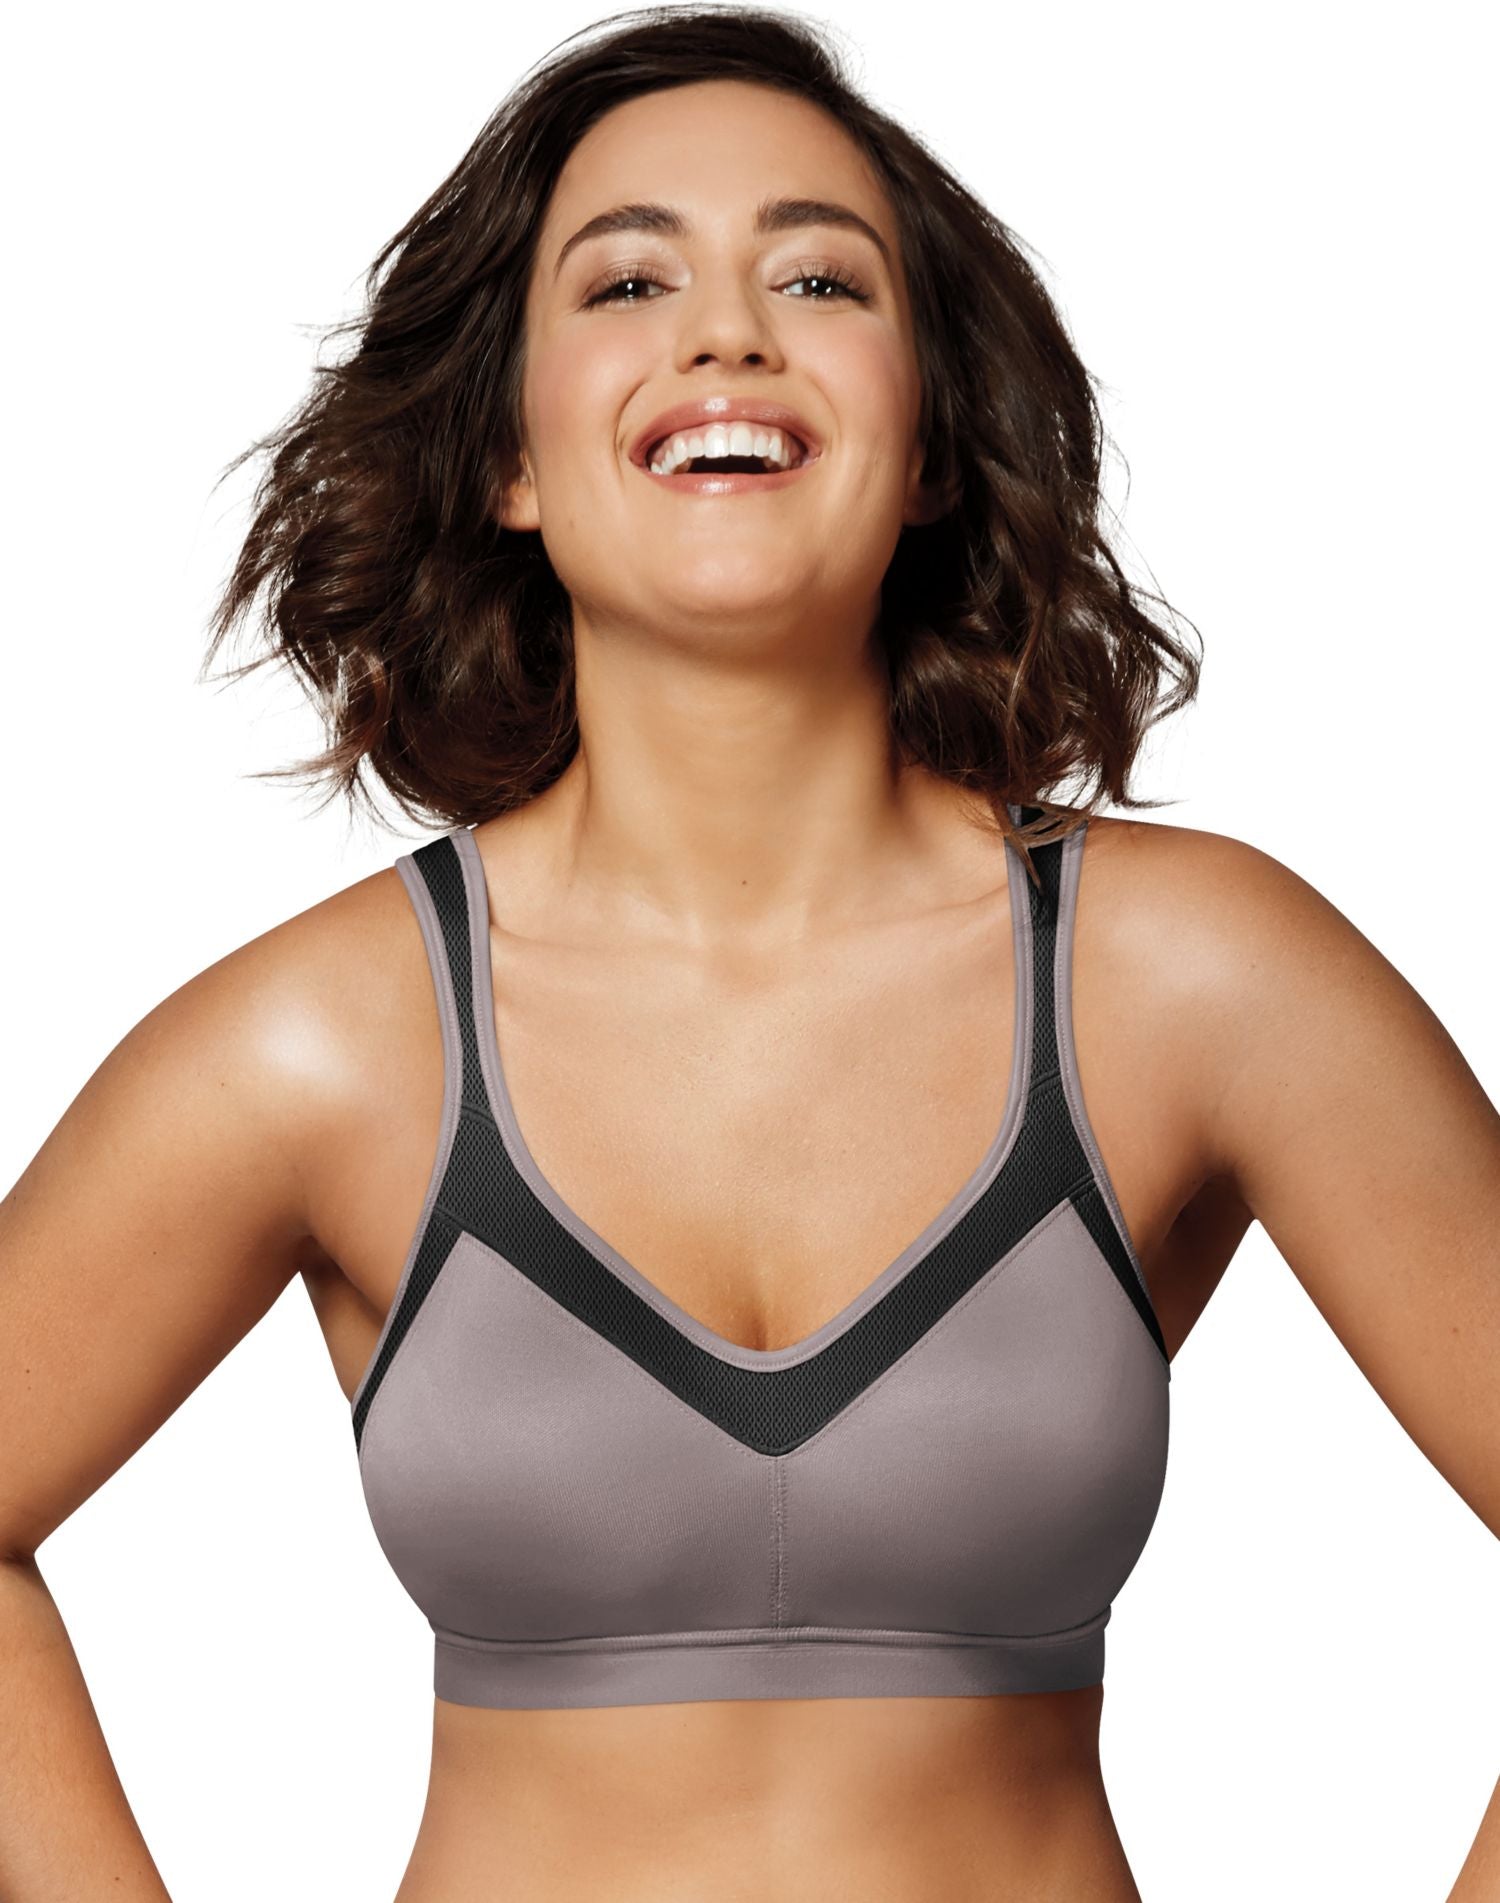 Playtex 18 Hour Active Lifestyle Full Coverage Bra #4159 New Size undefined  - $13 - From Shoptillyoudrop